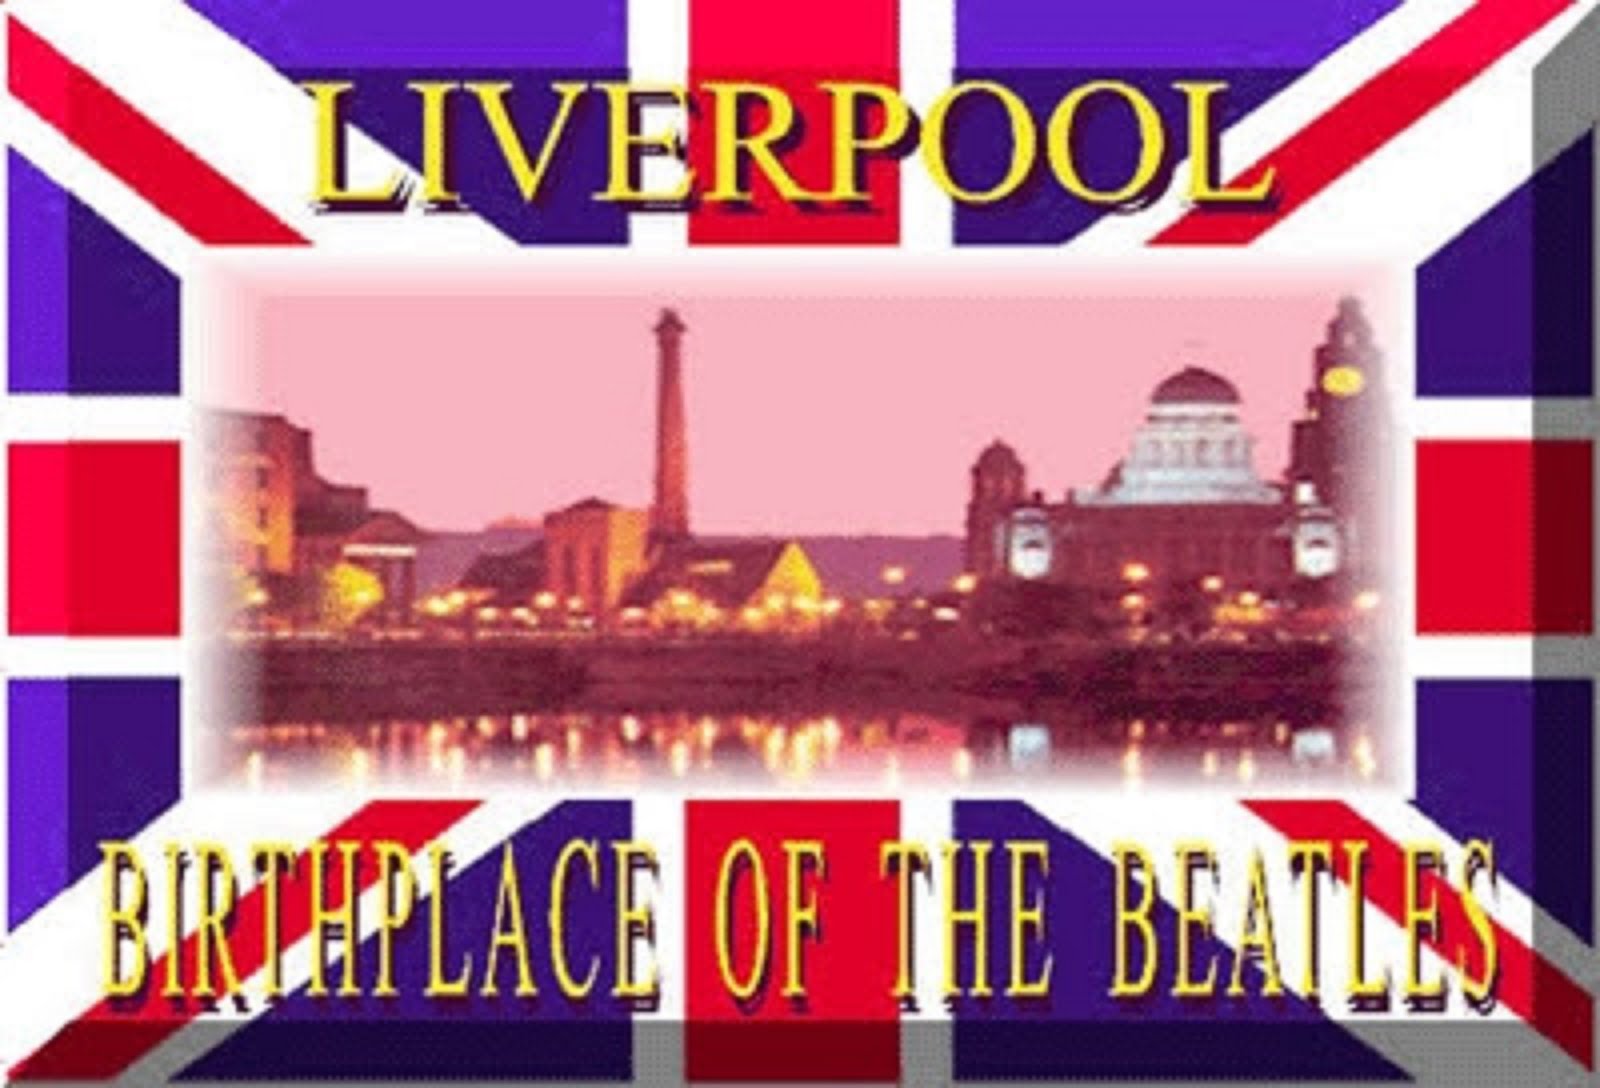 LIVERPOOL - THE BIRTH PLACE OF THE BEATLES